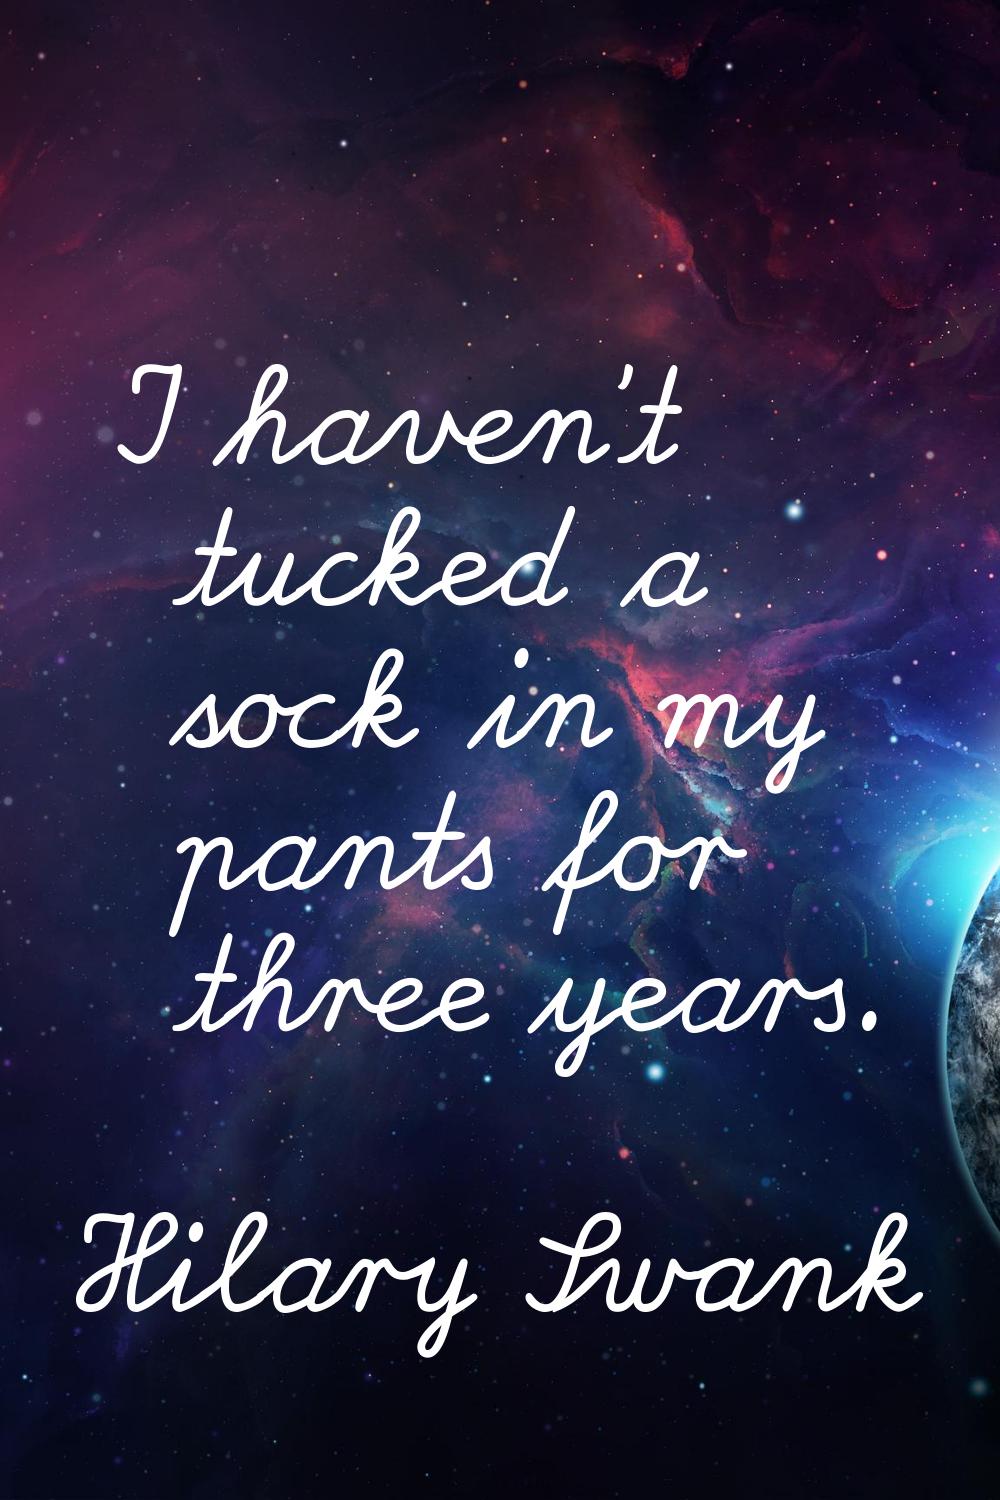 I haven't tucked a sock in my pants for three years.